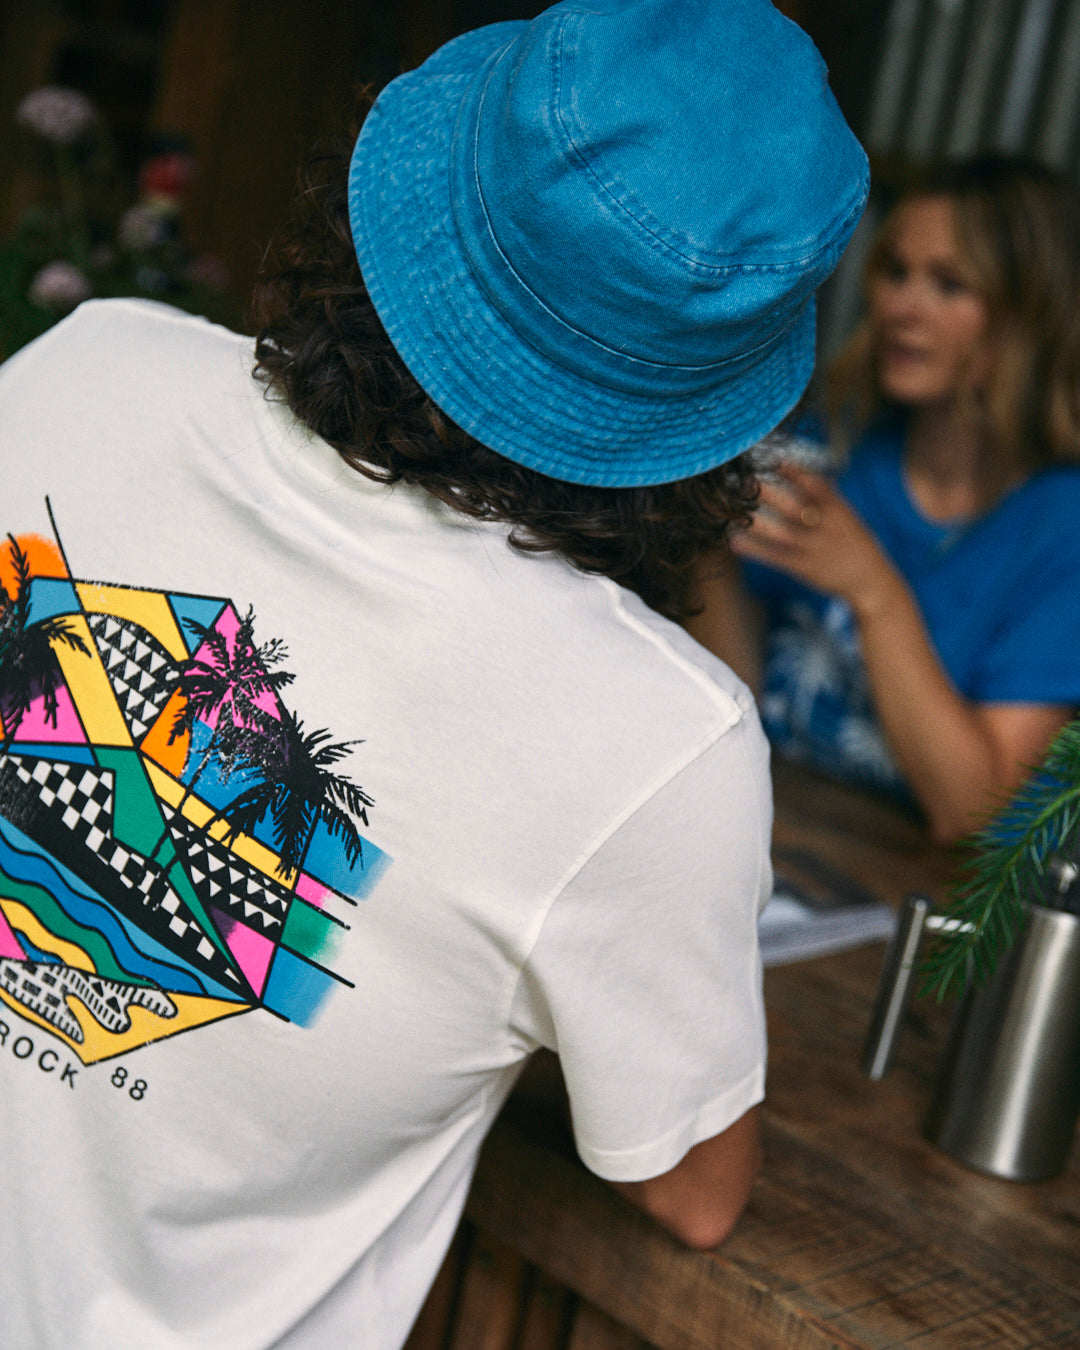 A person with long hair wearing a Saltrock Geo Palms men's white t-shirt featuring vibrant graphics sits at a wooden table, talking to another person in a blue shirt and blue hat.